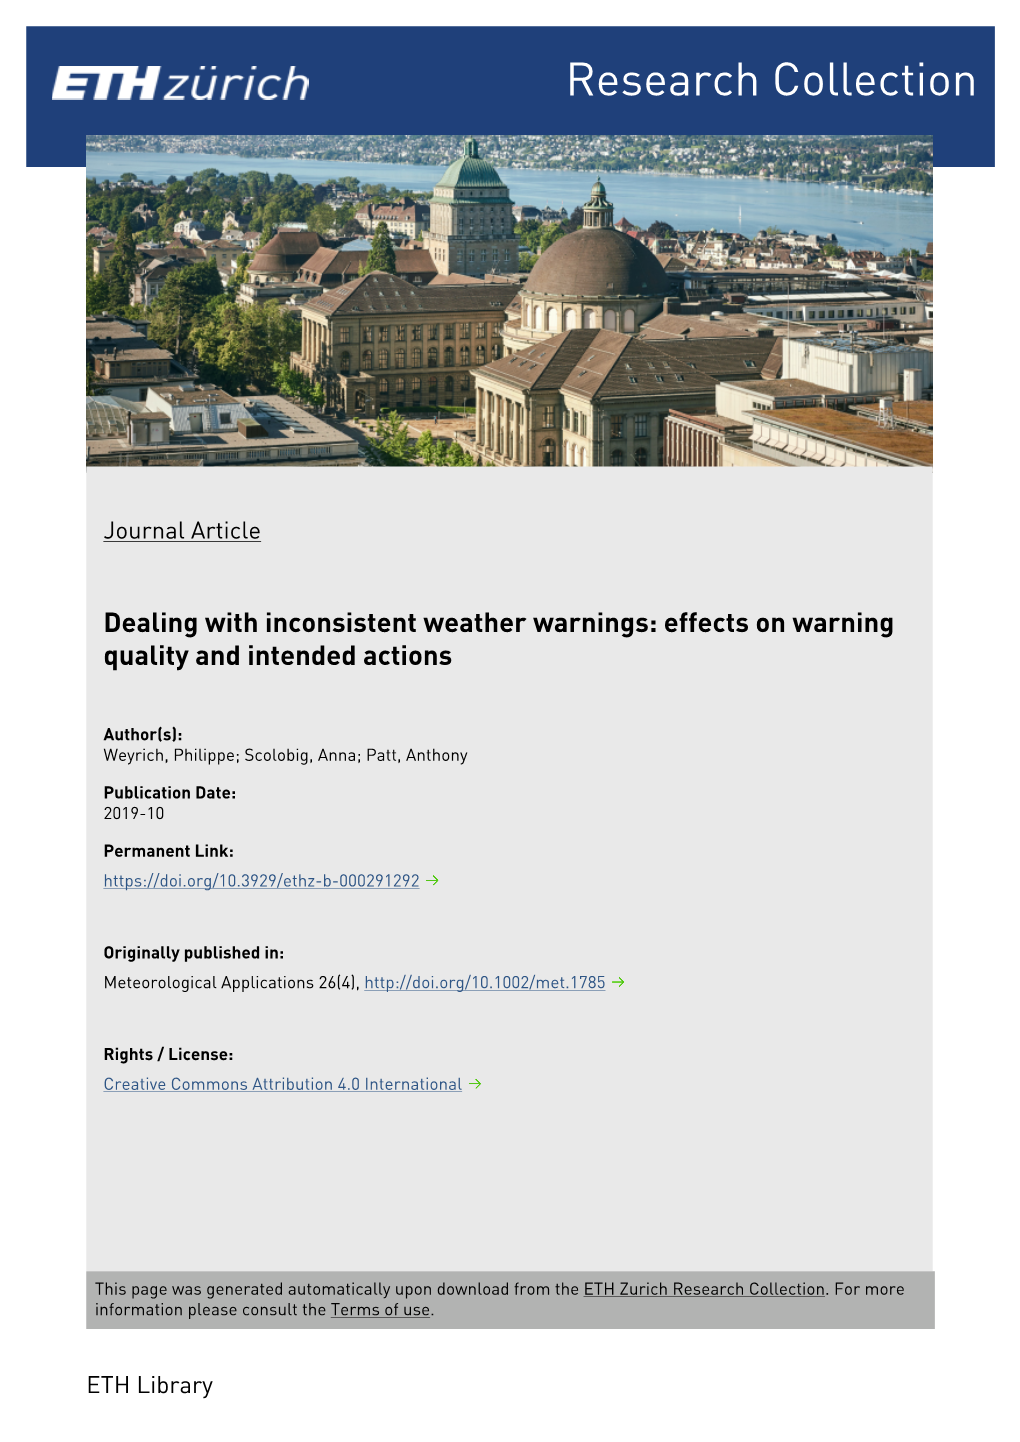 Dealing with Inconsistent Weather Warnings: Effects on Warning Quality and Intended Actions